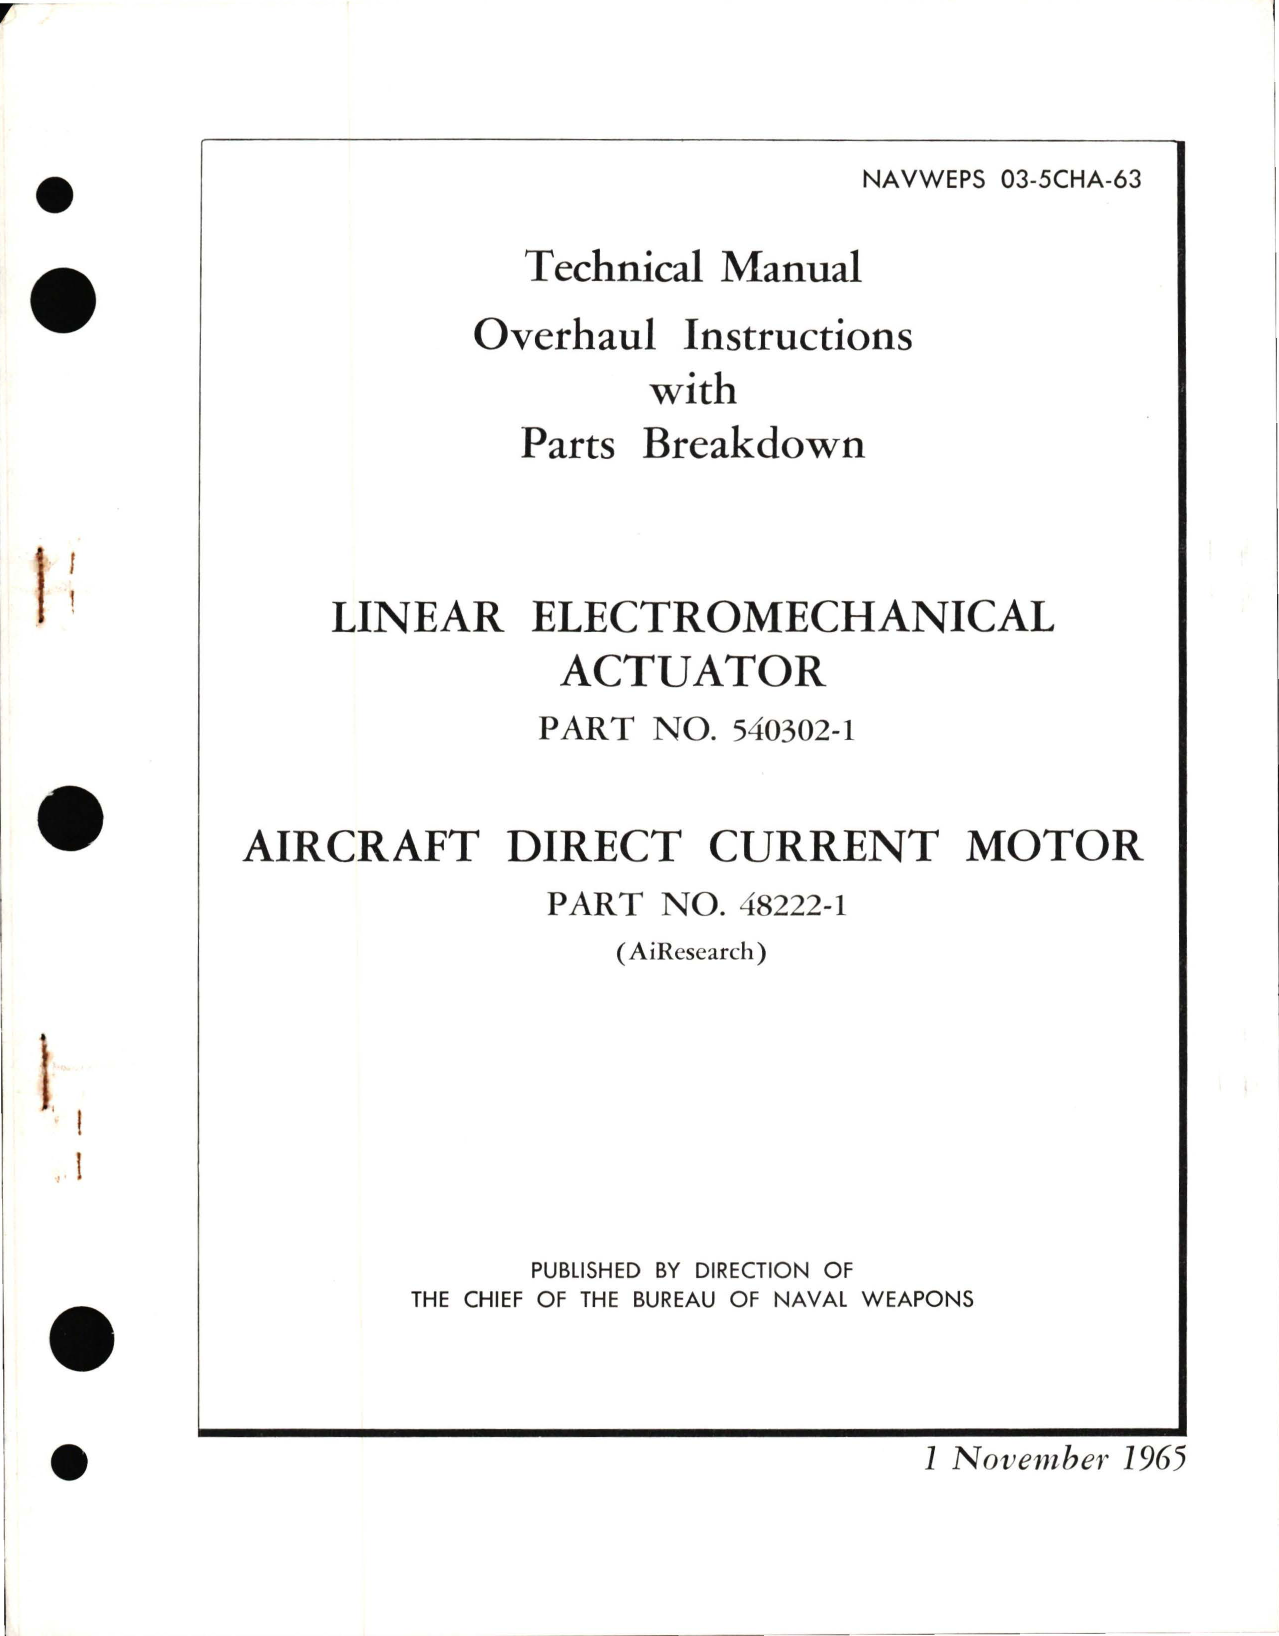 Sample page 1 from AirCorps Library document: Overhaul Instructions with Parts Breakdown for Linear Electromechanical Actuator and Aircraft Direct Current Motor 